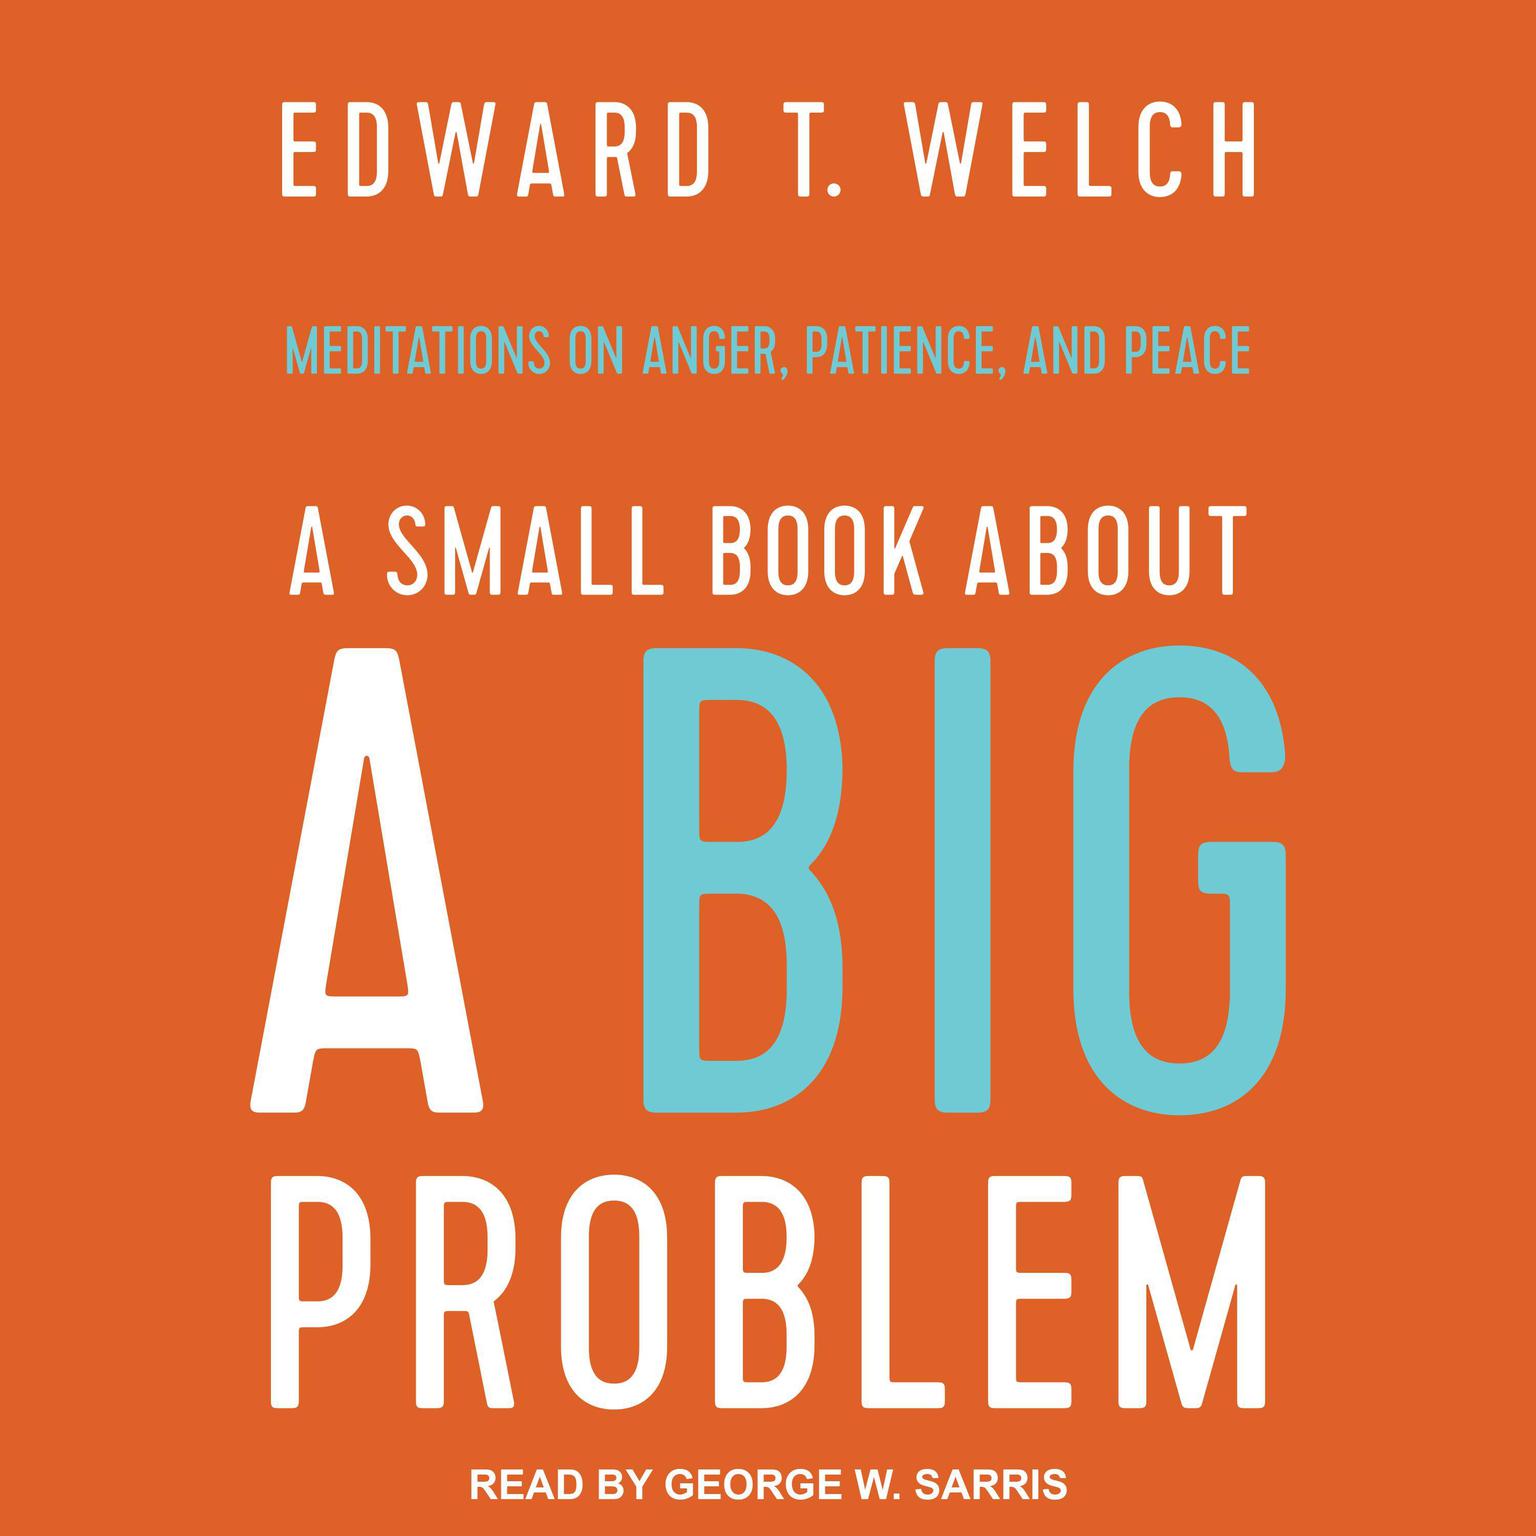 A Small Book about a Big Problem: Meditations on Anger, Patience, and Peace Audiobook, by Edward T. Welch